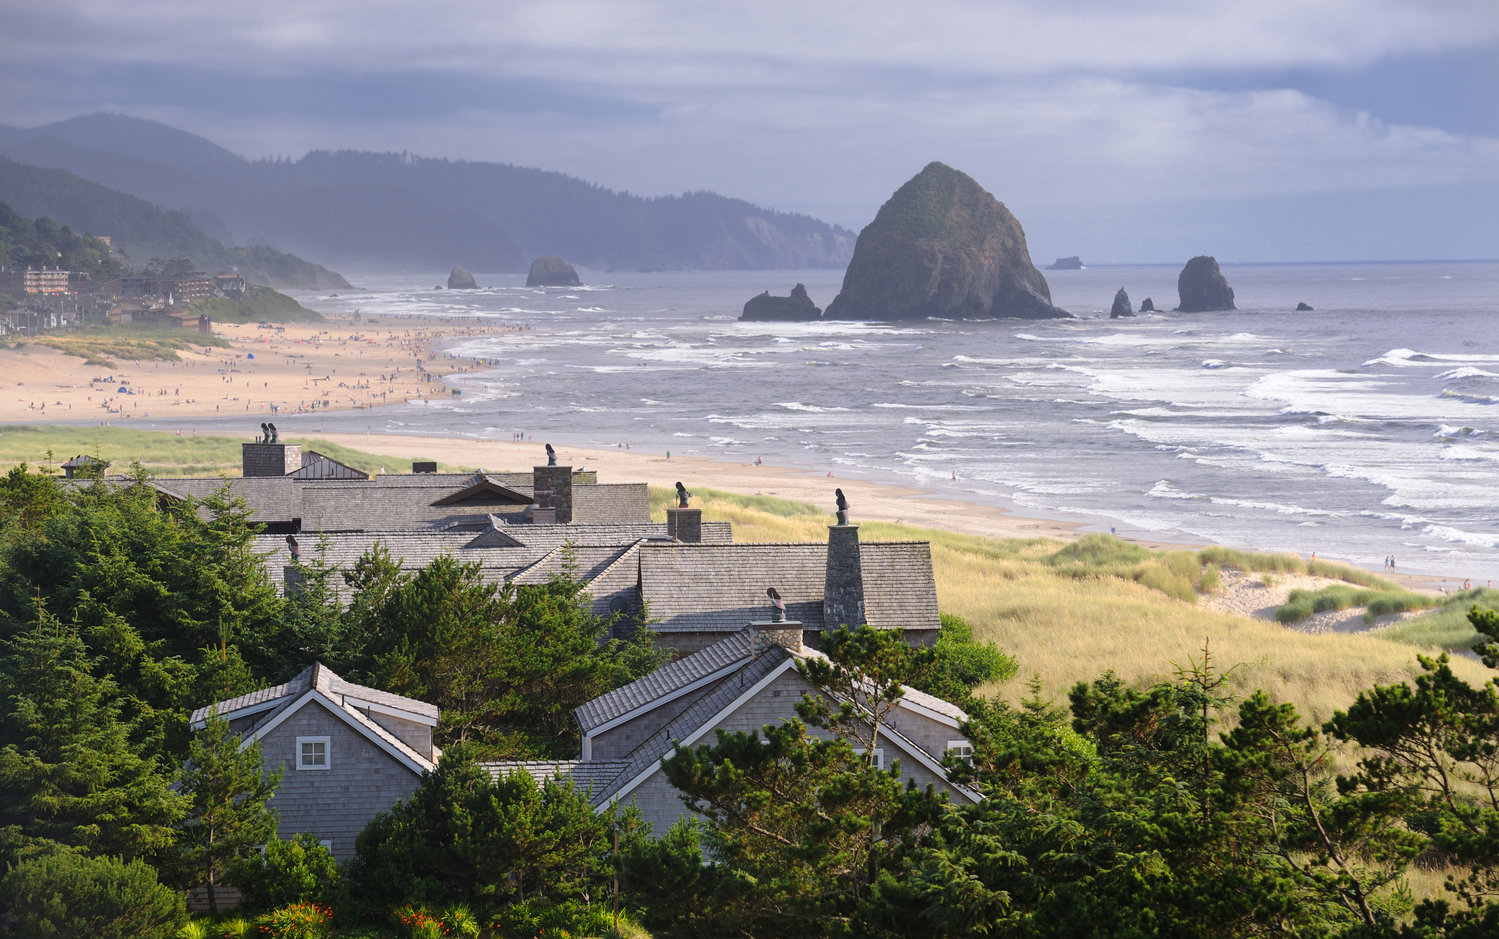 The famous Haystack Rock on Cannon Beach, Ore., with an incredible cloudscape building up on the horizon as the mist of the waves sprays over beach-goers.